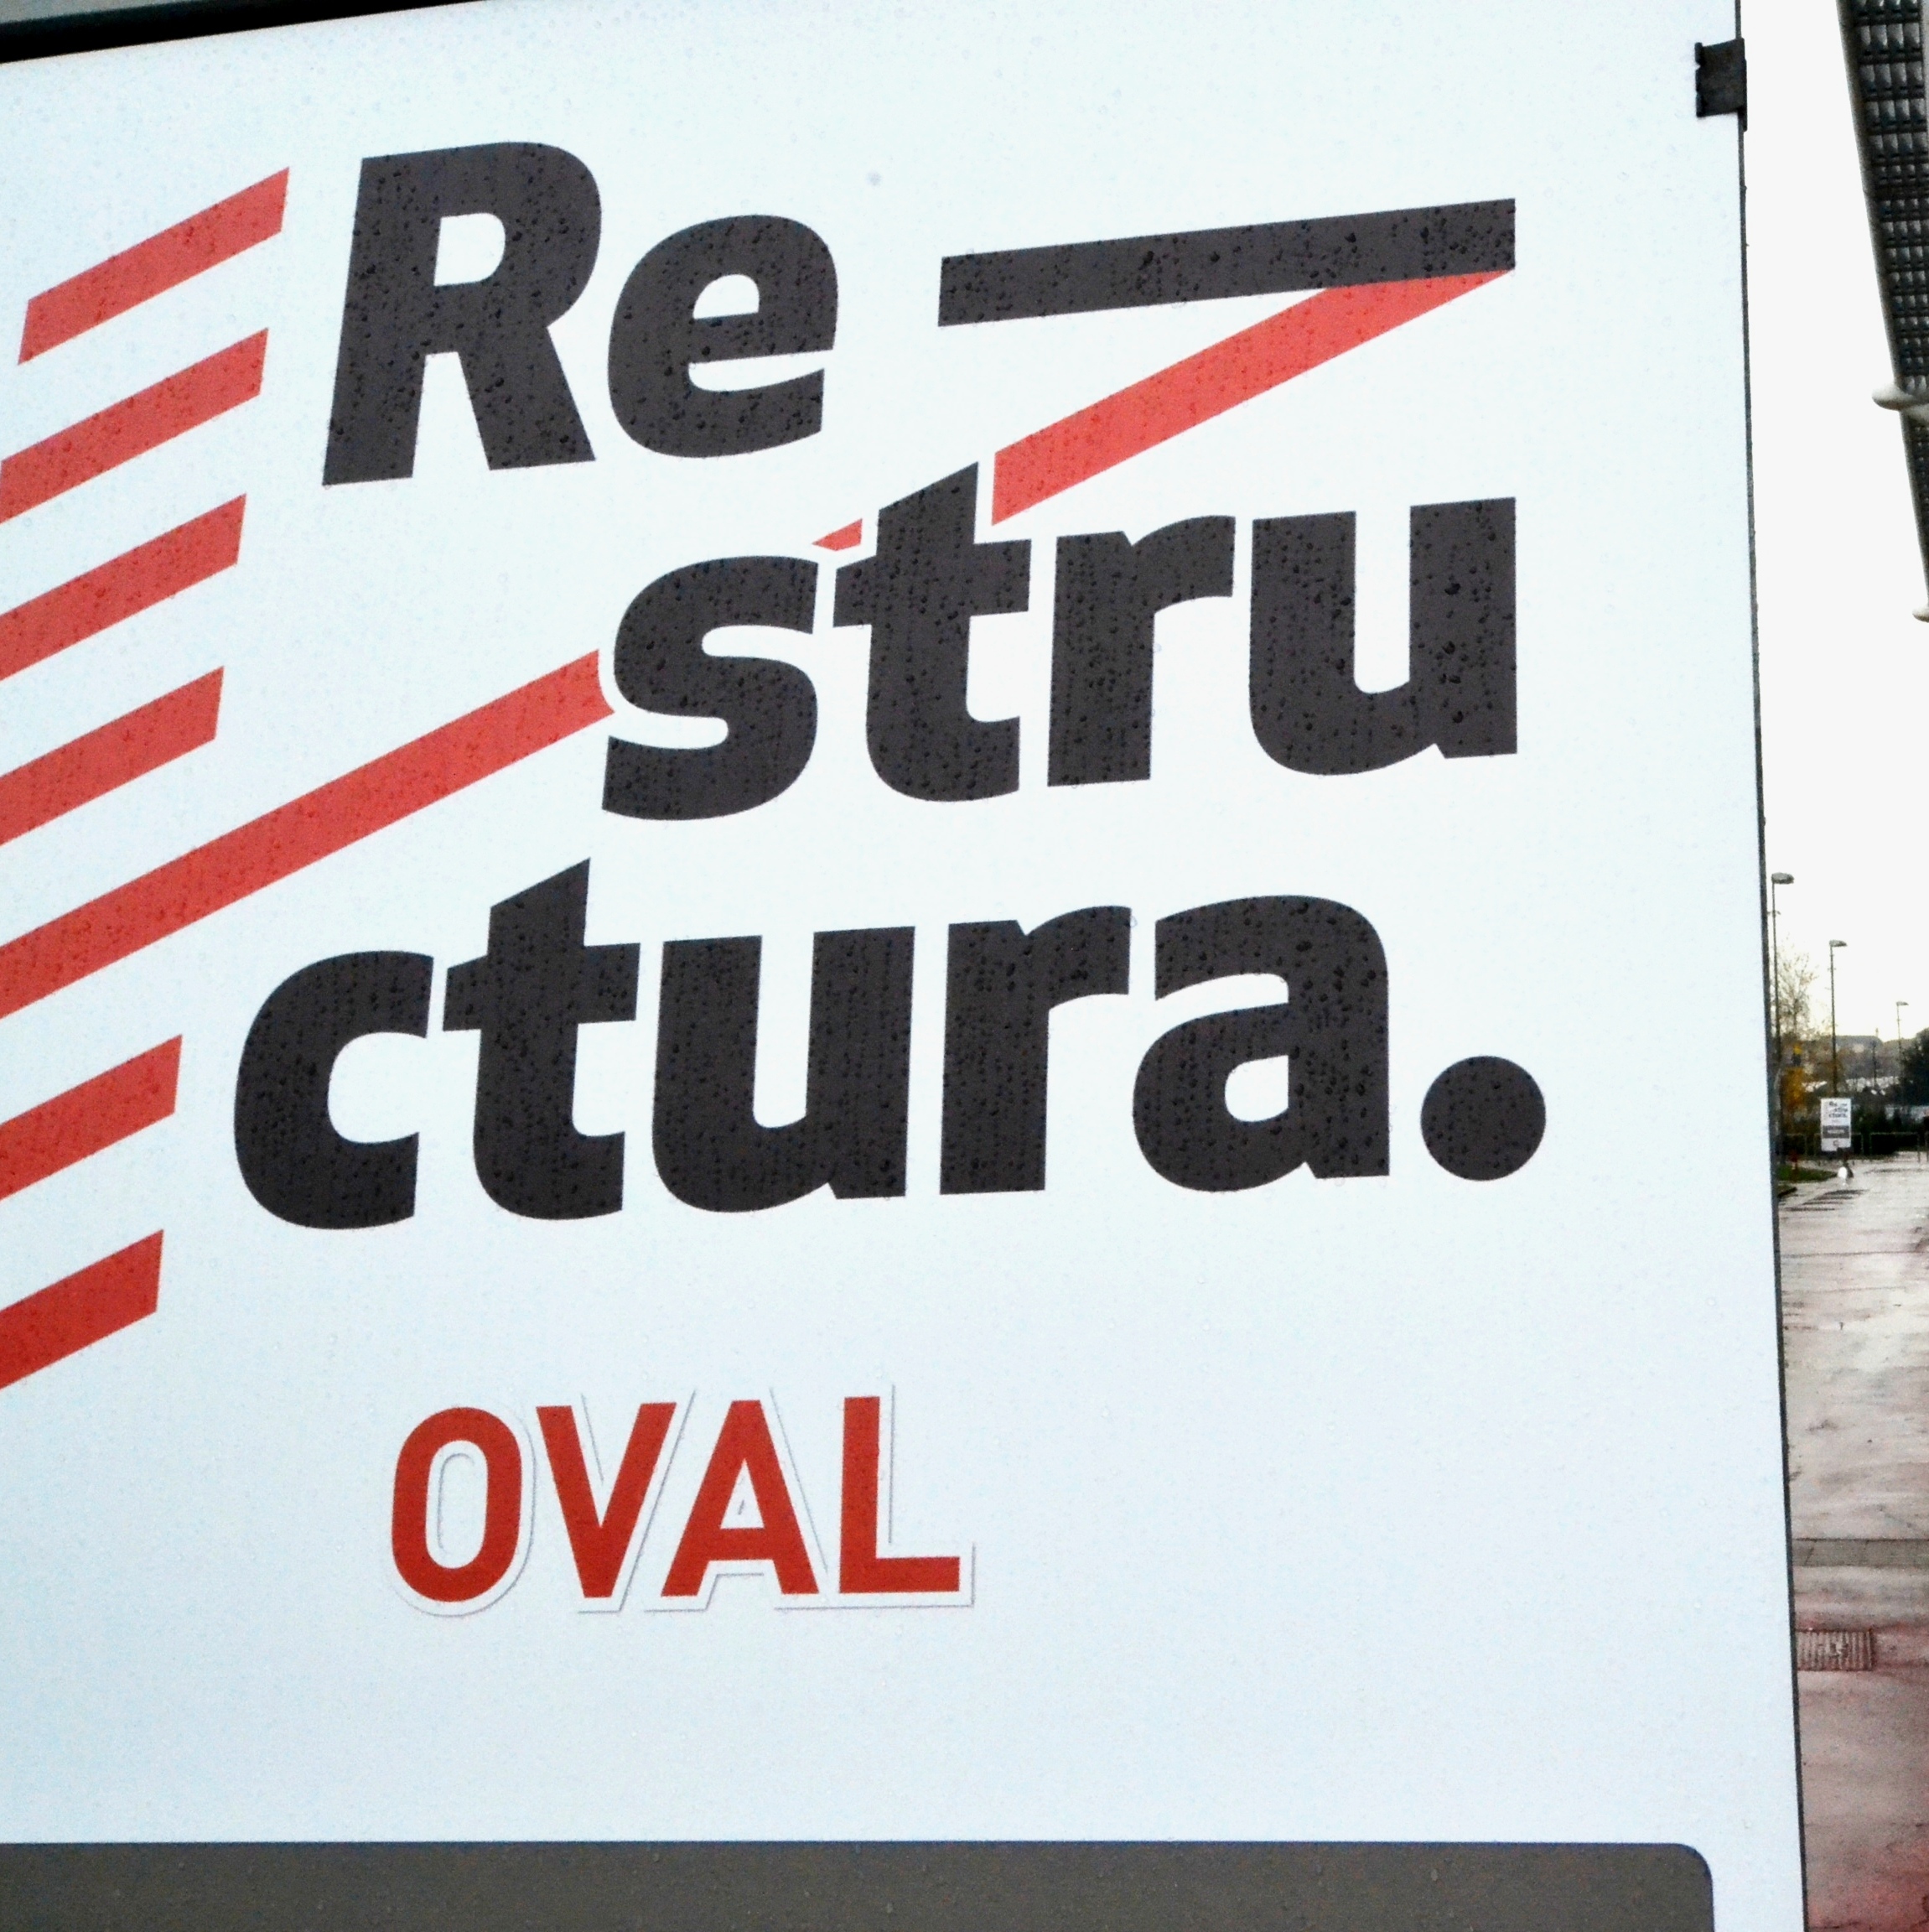 Stand a Restructura